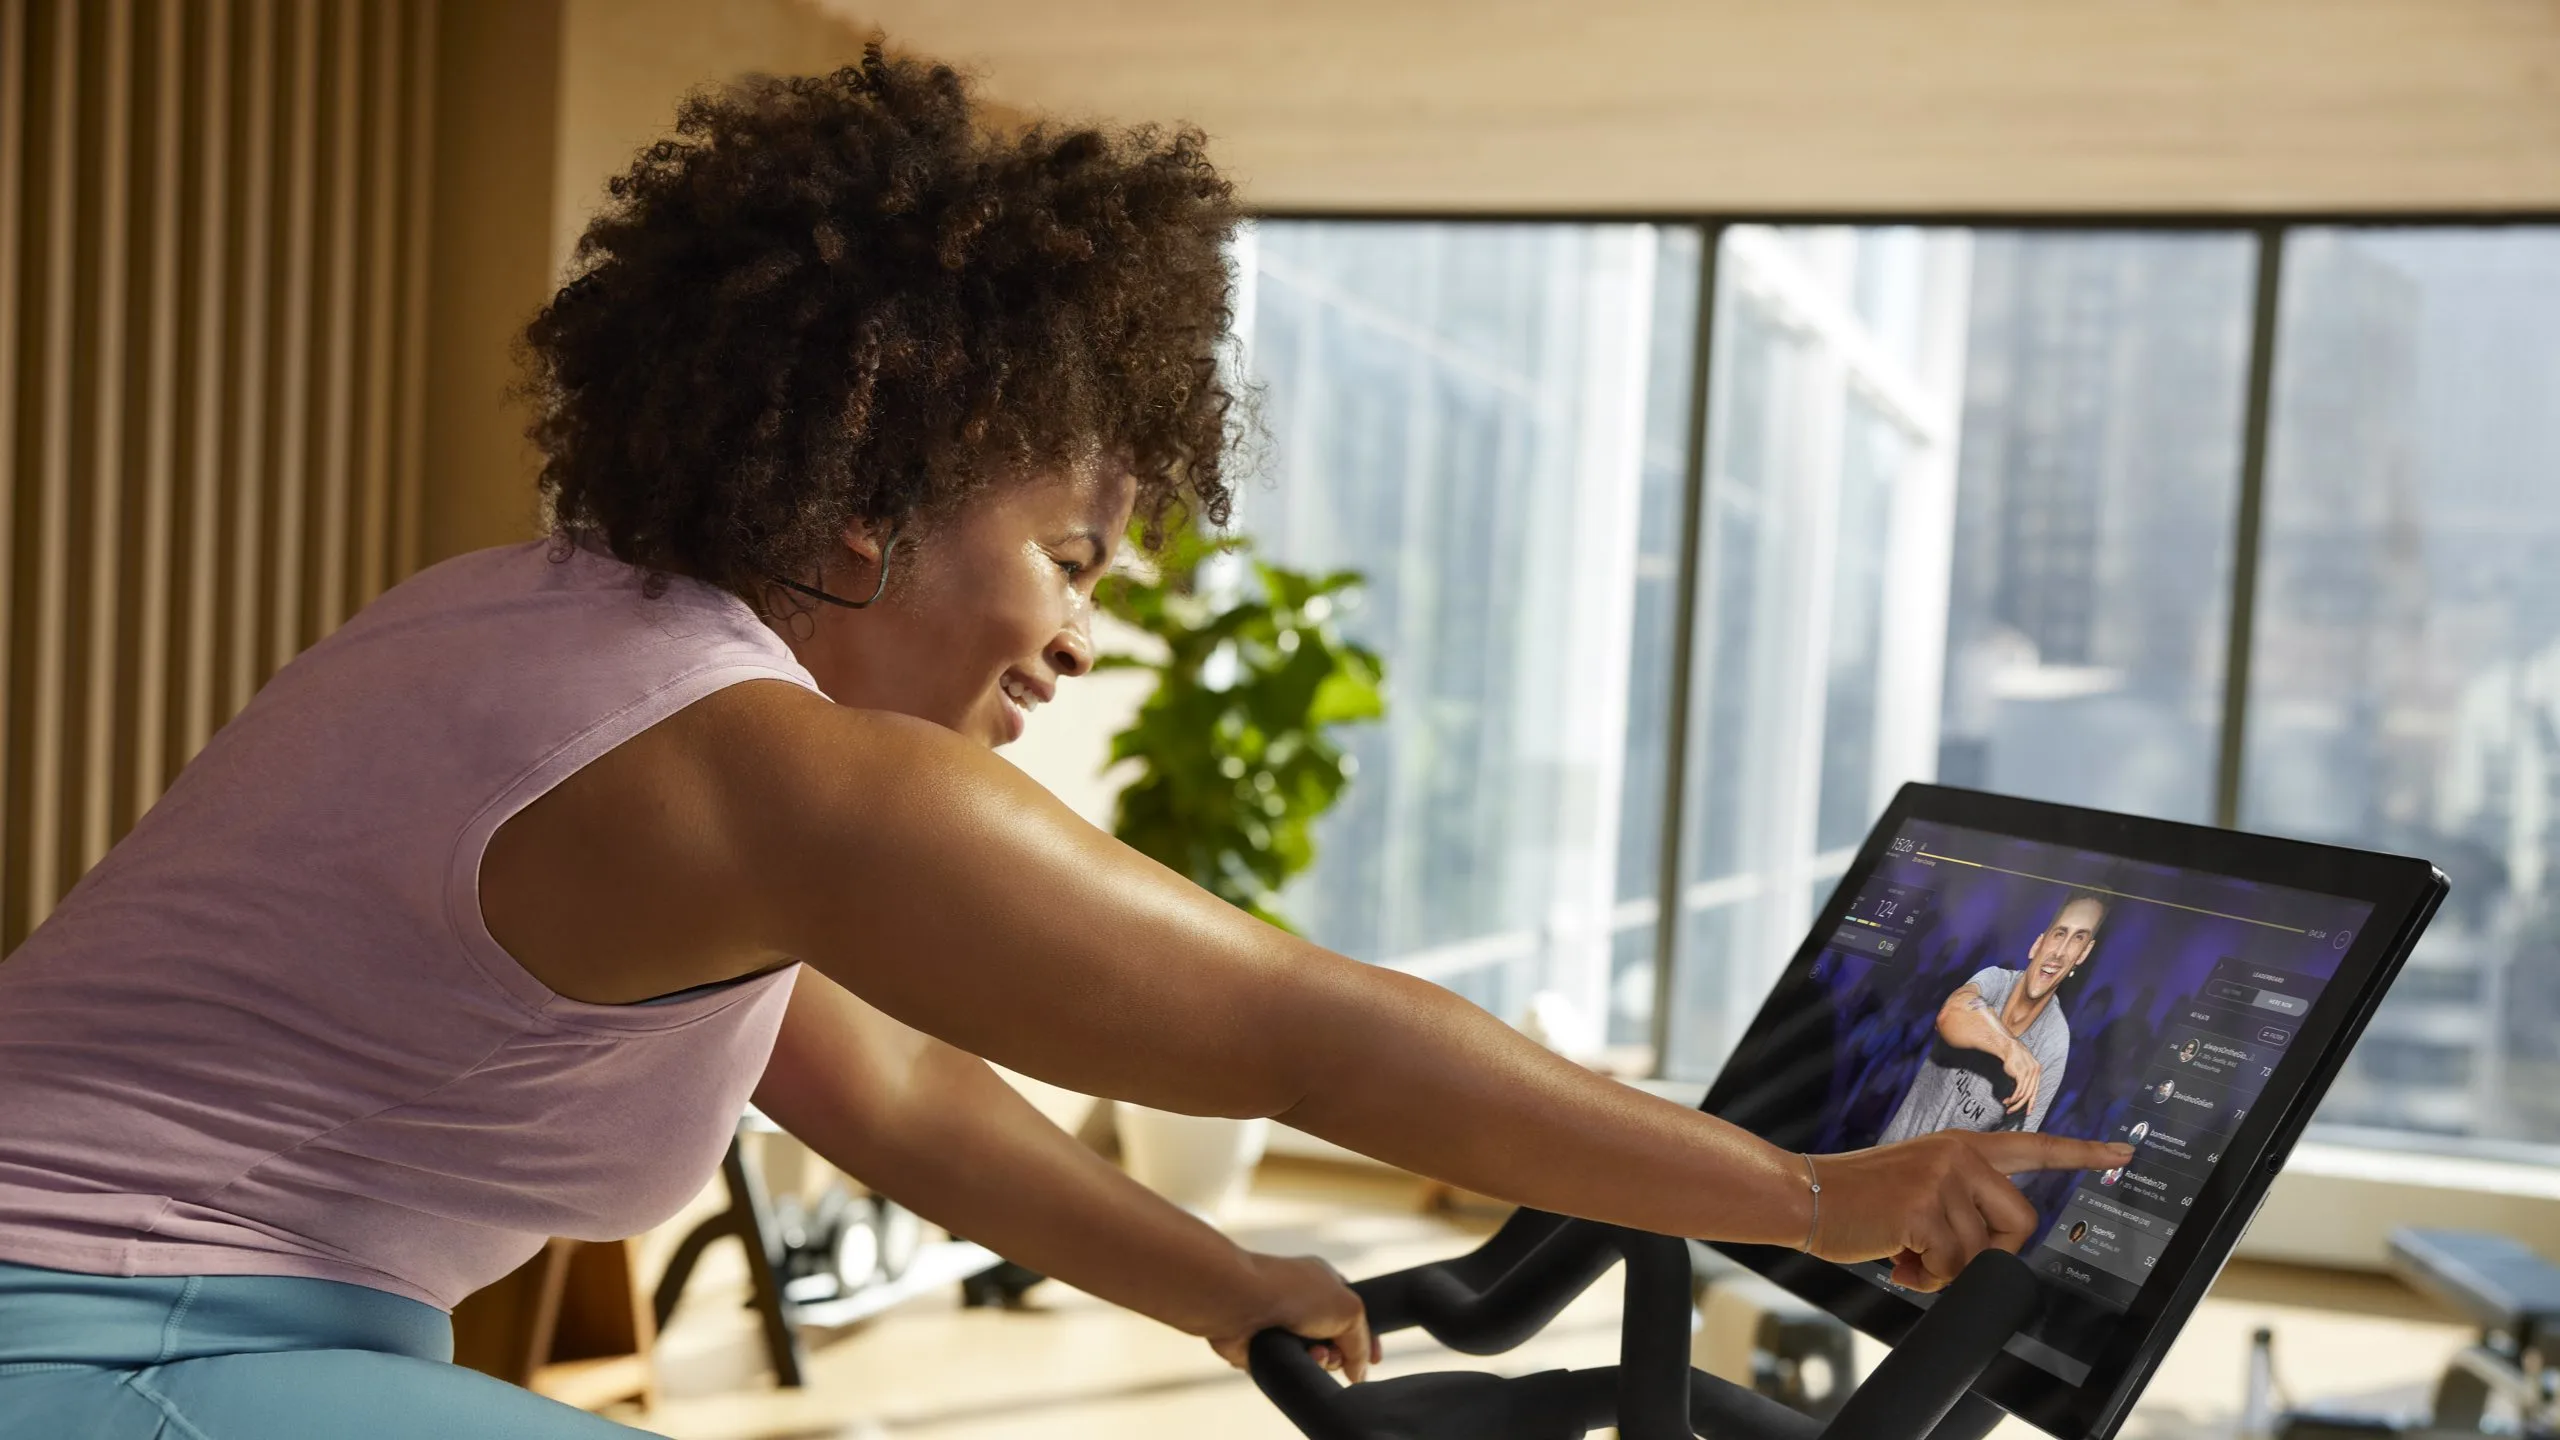 Exerciser interacting with a console on a Peloton Bike